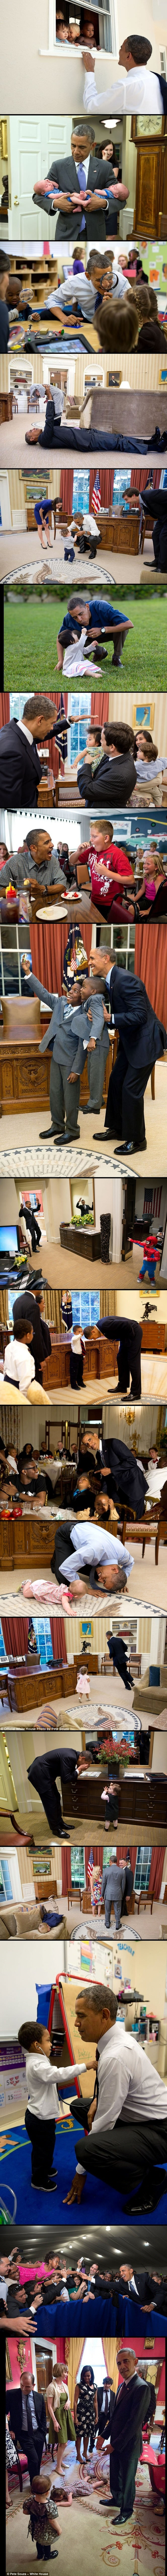 Obama is really good with kids